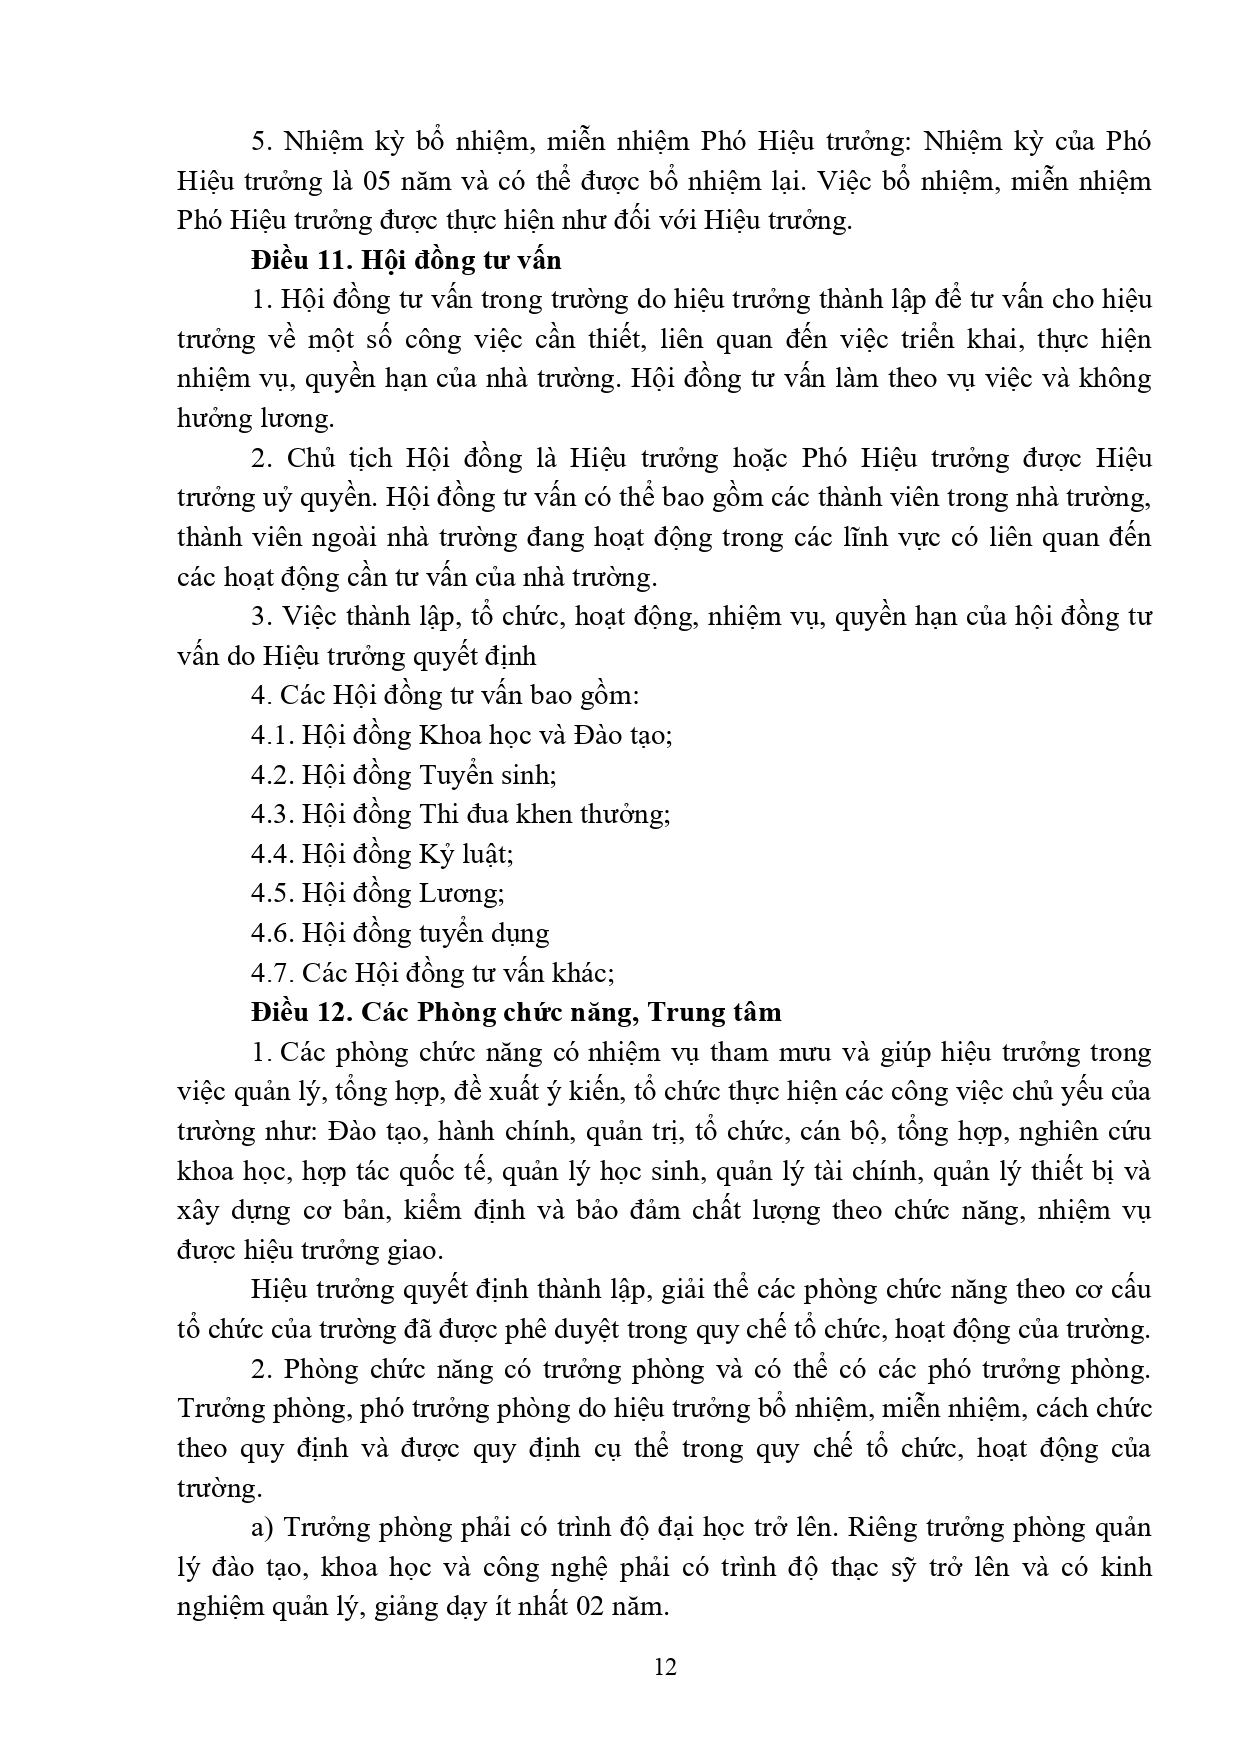 12 QUY CHE TO CHUC VA HOAT DONG CUA TRUONG CD DLCT page-0012